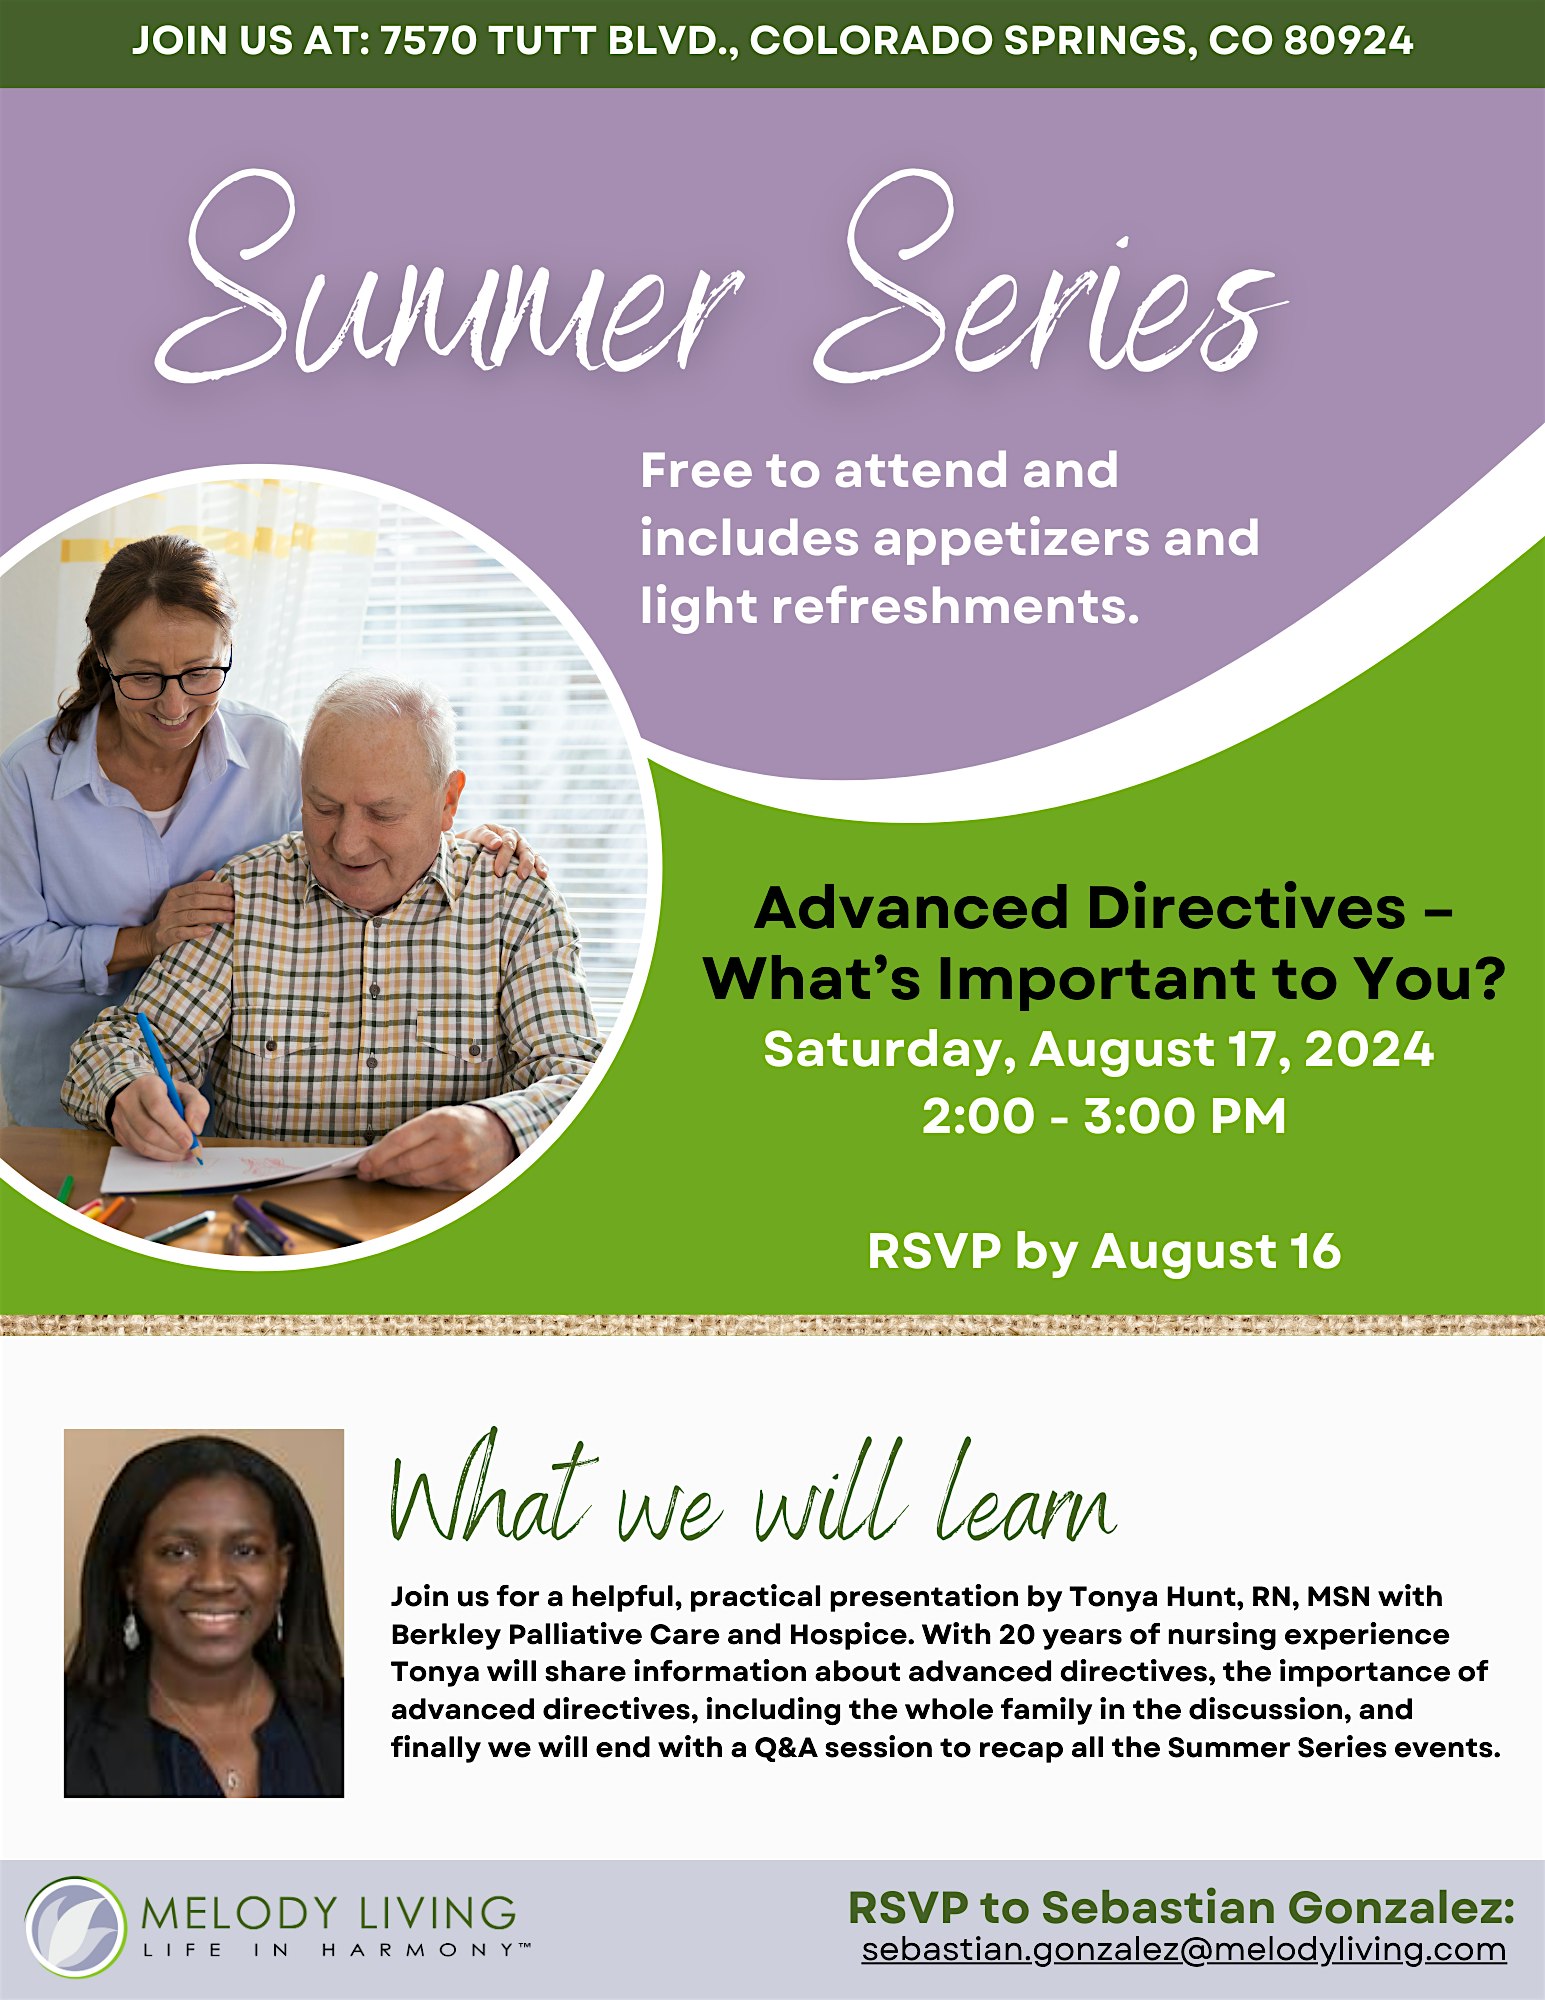 Summer Series: Advanced Directives - What's Important to You?